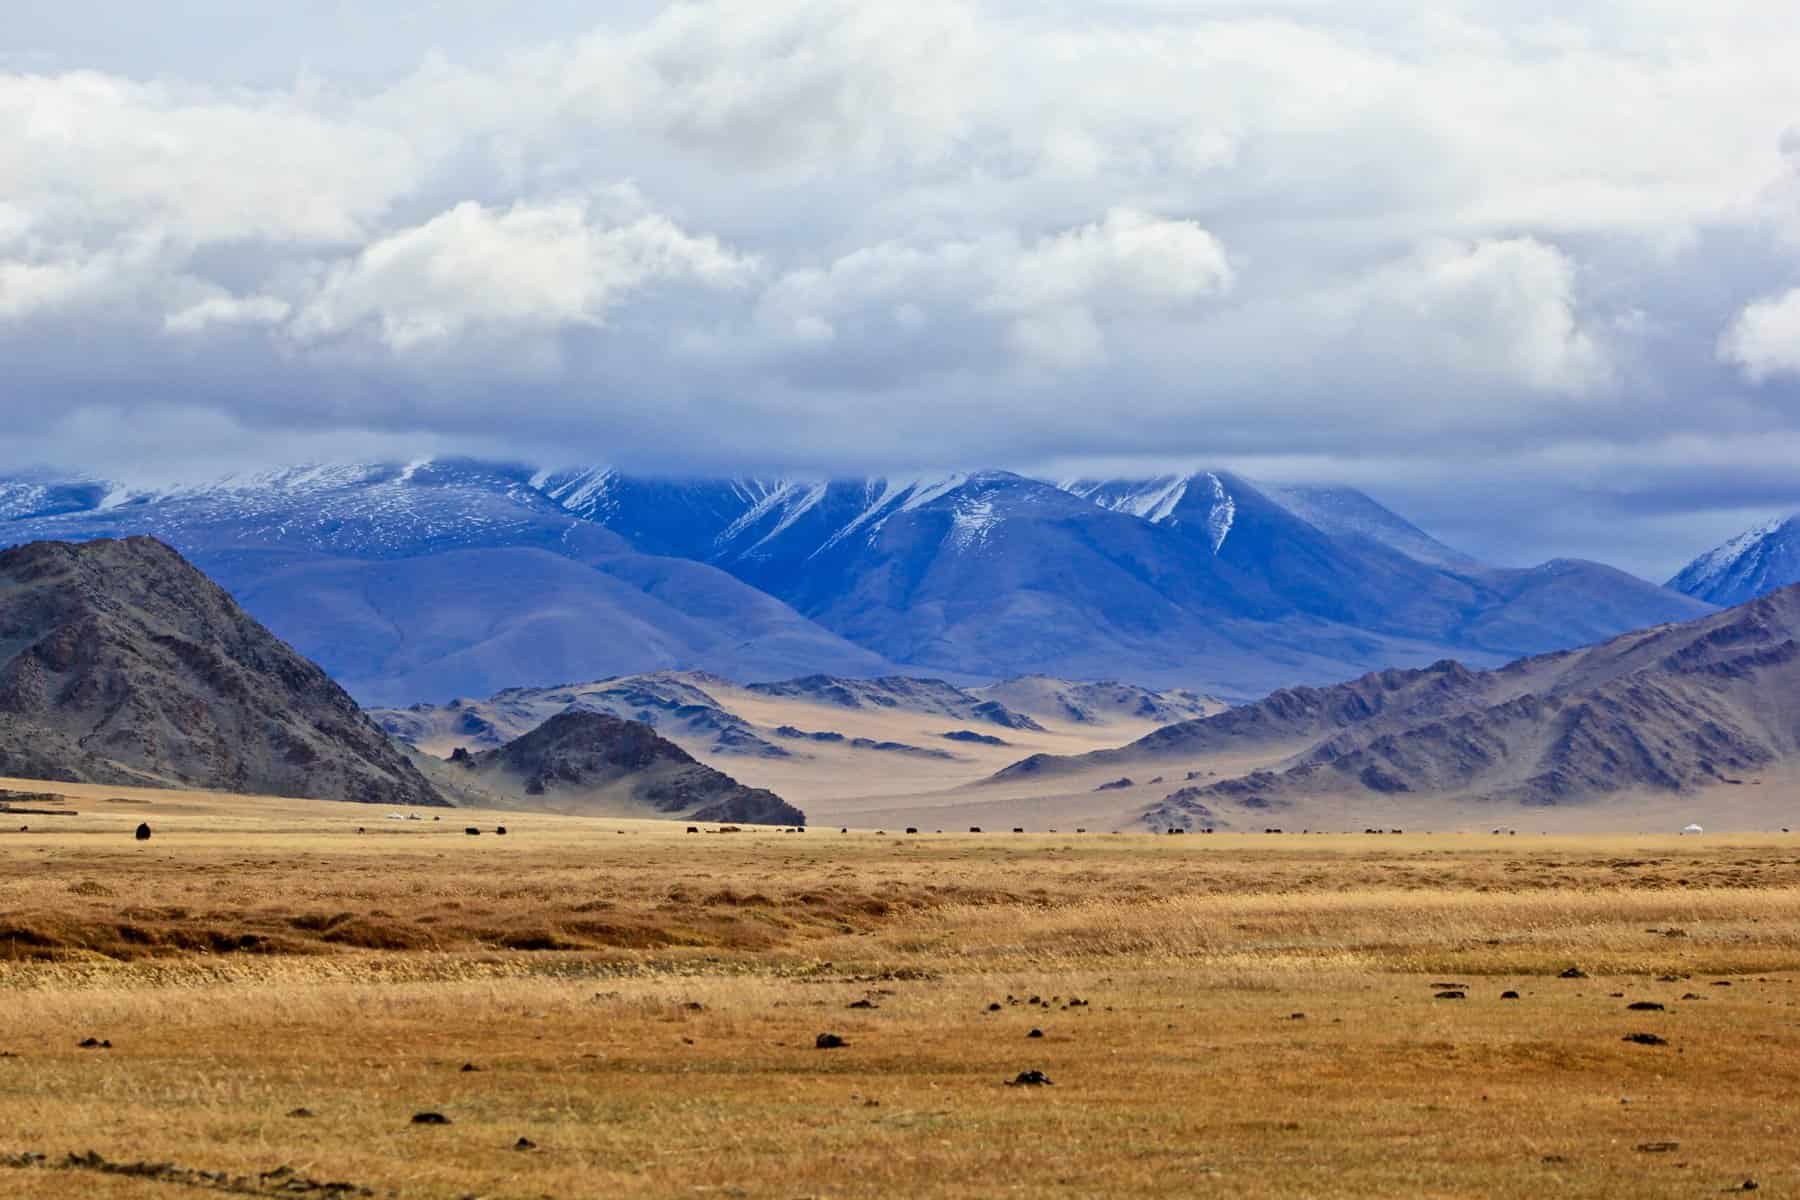 Mountains in Mongolia are seen with golden grass in front of them.